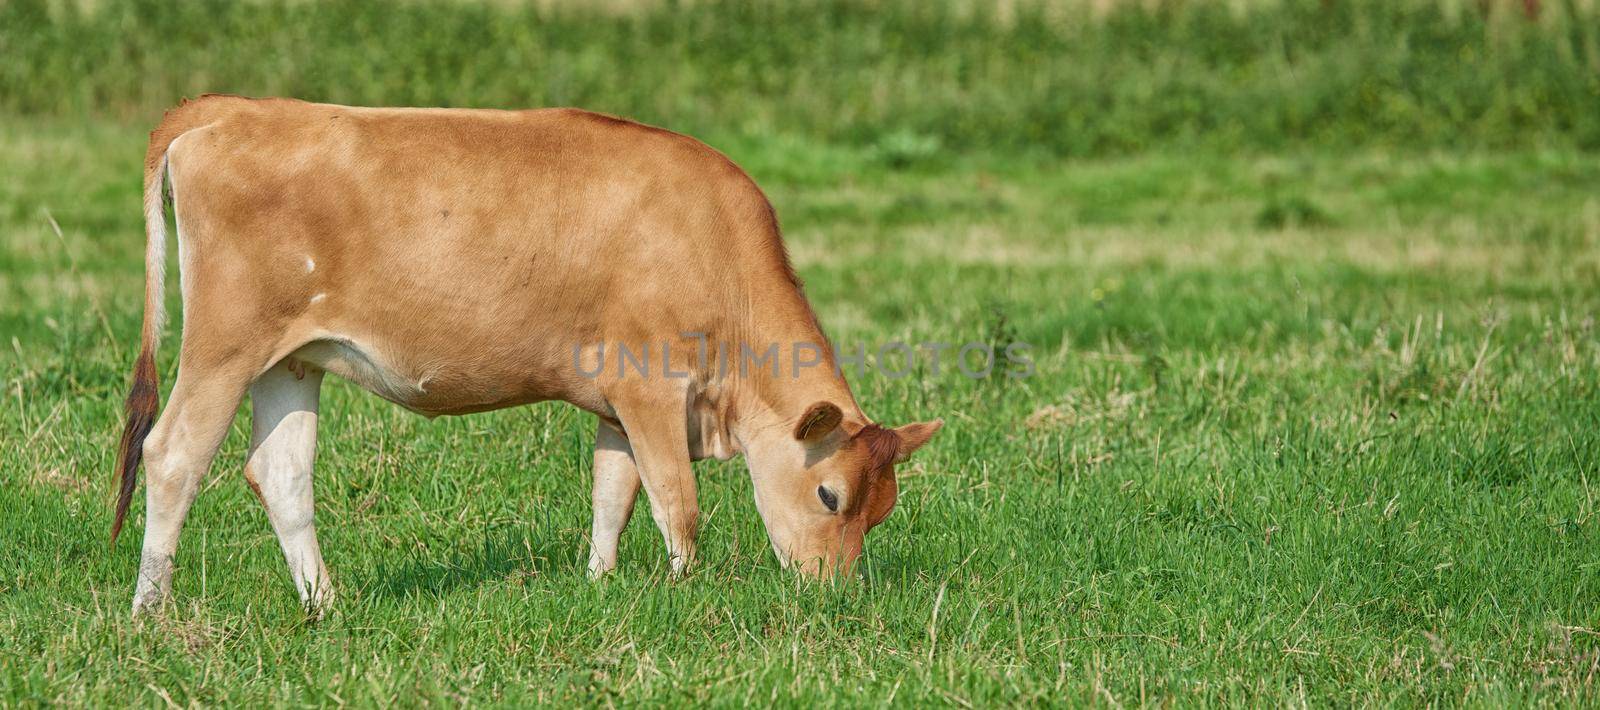 A brown cow grazing on an organic green dairy farm in the countryside. Cattle or livestock in an open, empty and vast grassy field or meadow. Bovine animals on agricultural and sustainable land by YuriArcurs